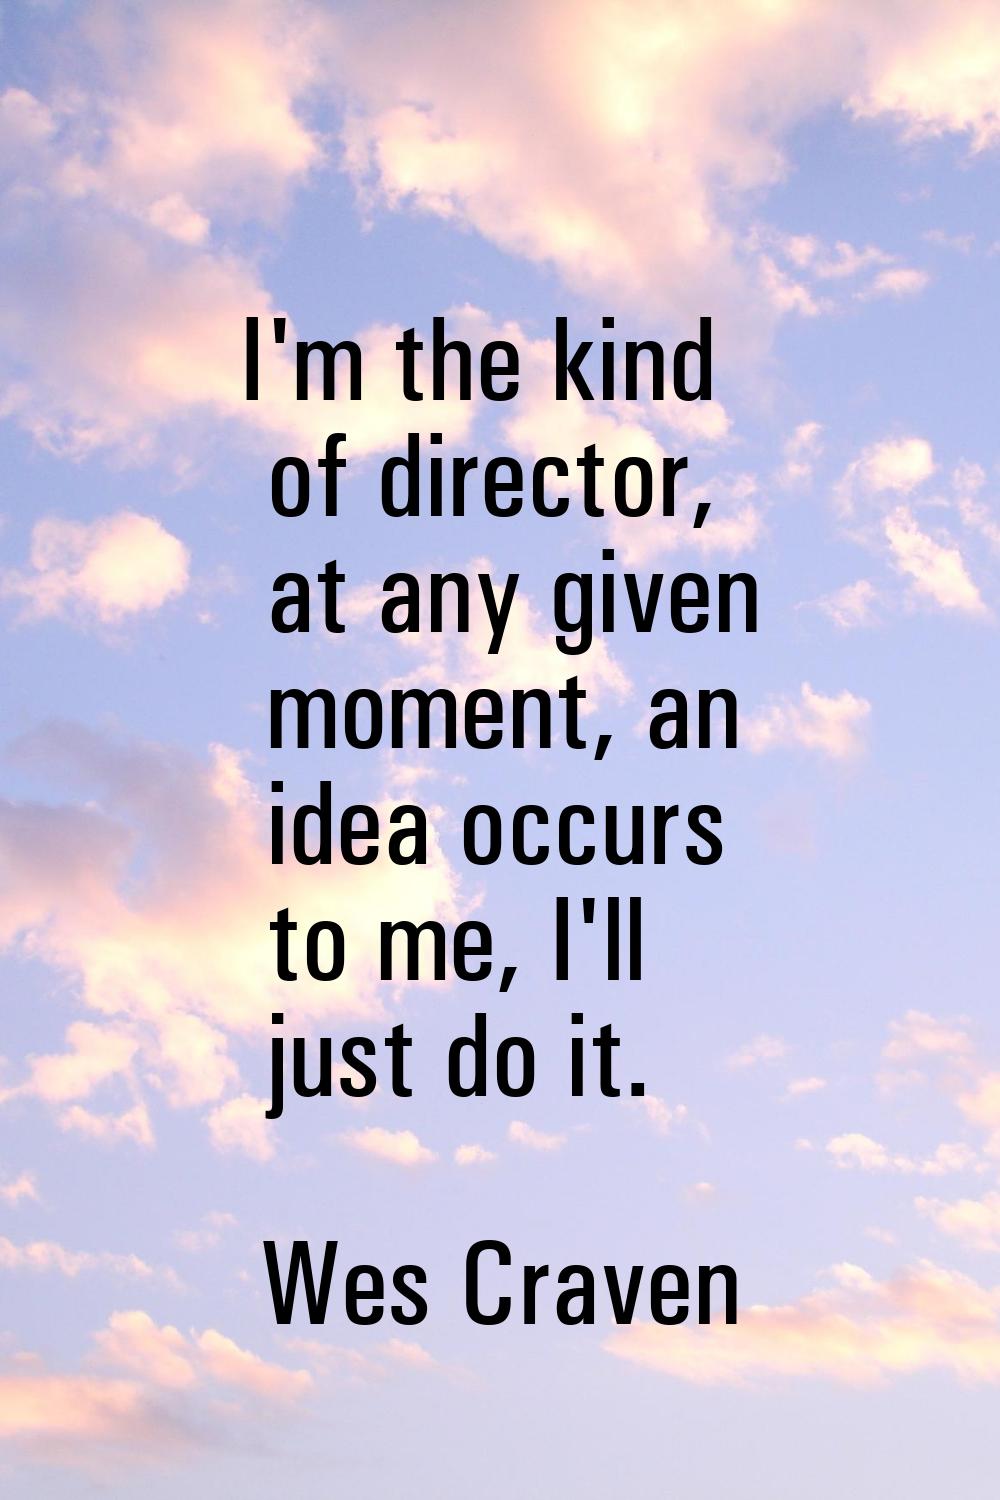 I'm the kind of director, at any given moment, an idea occurs to me, I'll just do it.